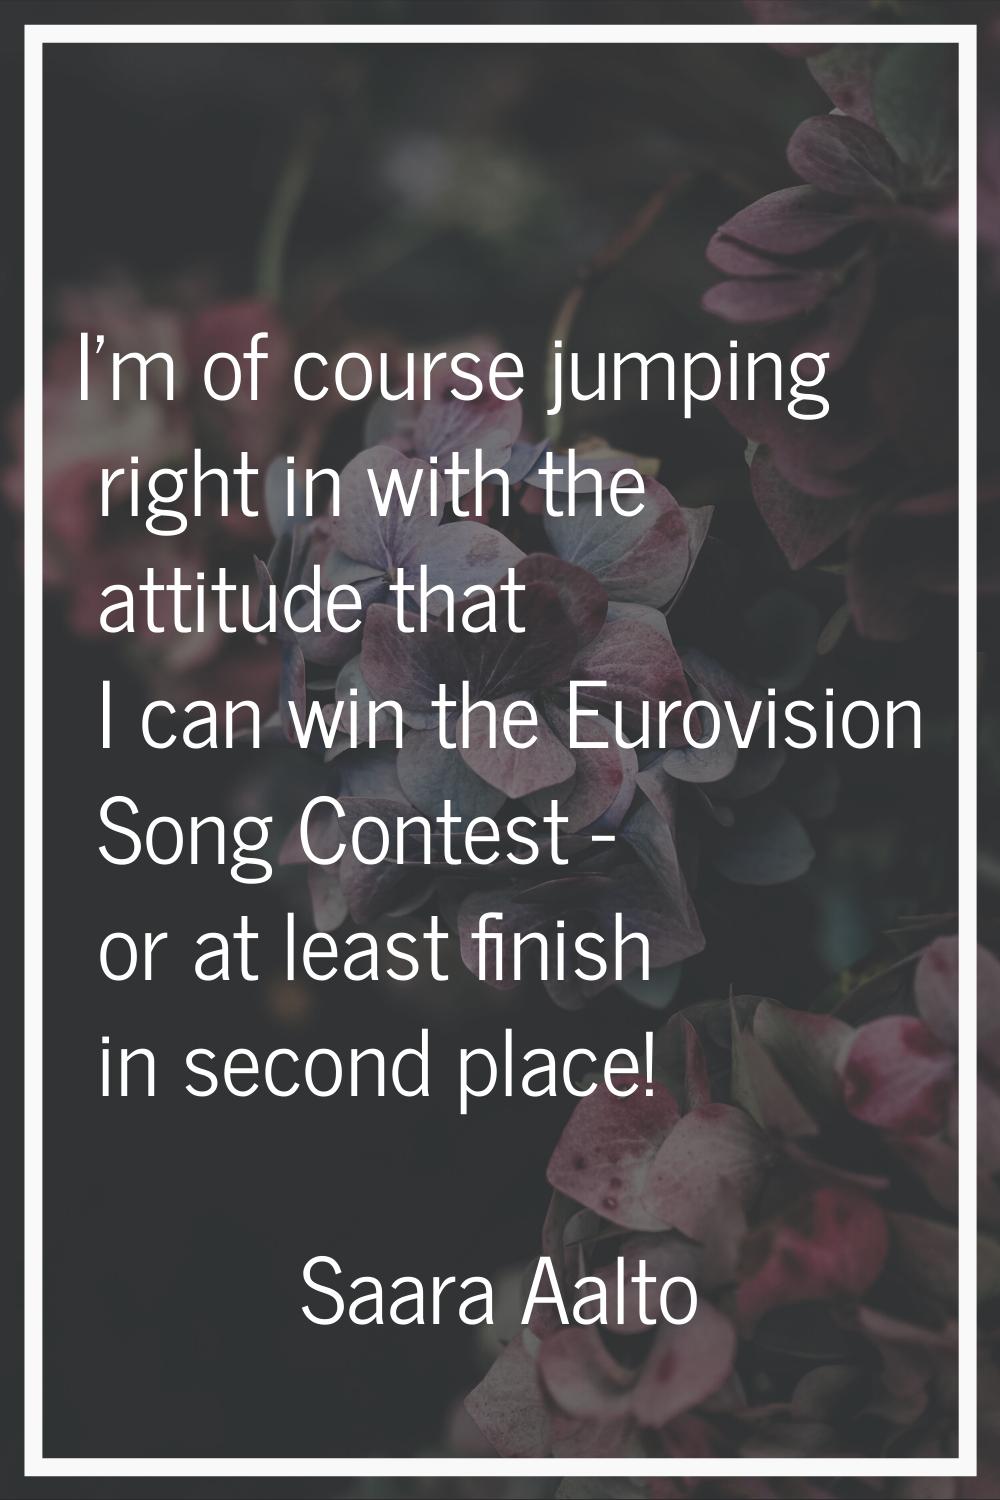 I'm of course jumping right in with the attitude that I can win the Eurovision Song Contest - or at